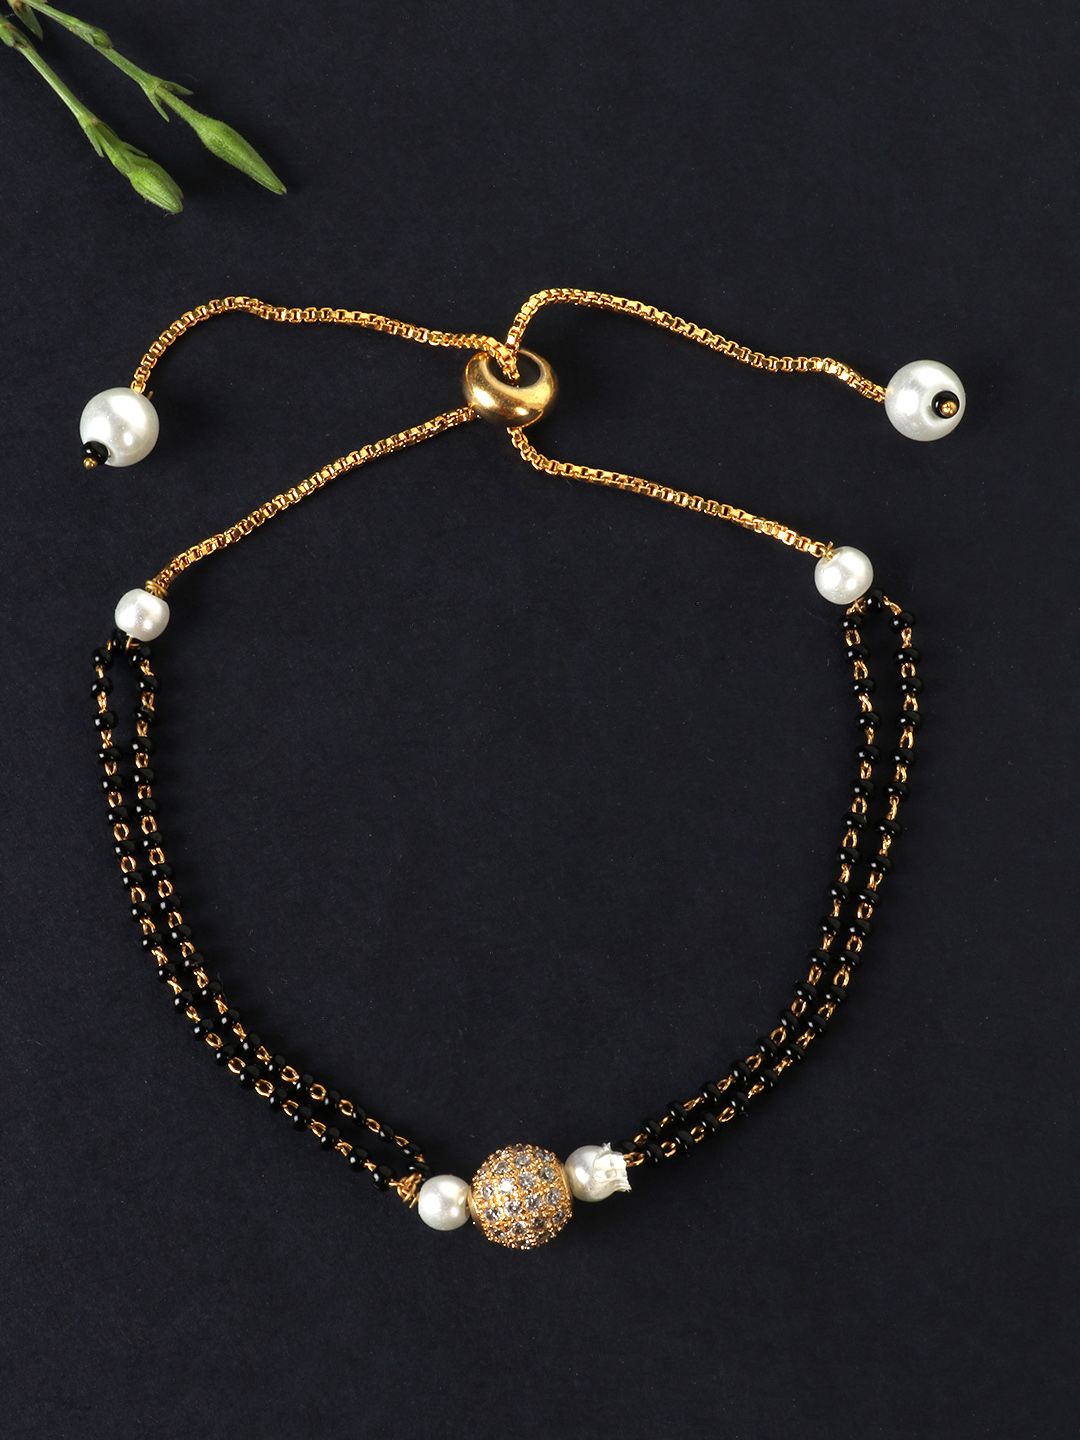 JEWELS GEHNA Black & White Gold-Plated Beaded & AD-Studded Mangalsutra Bracelet Price in India